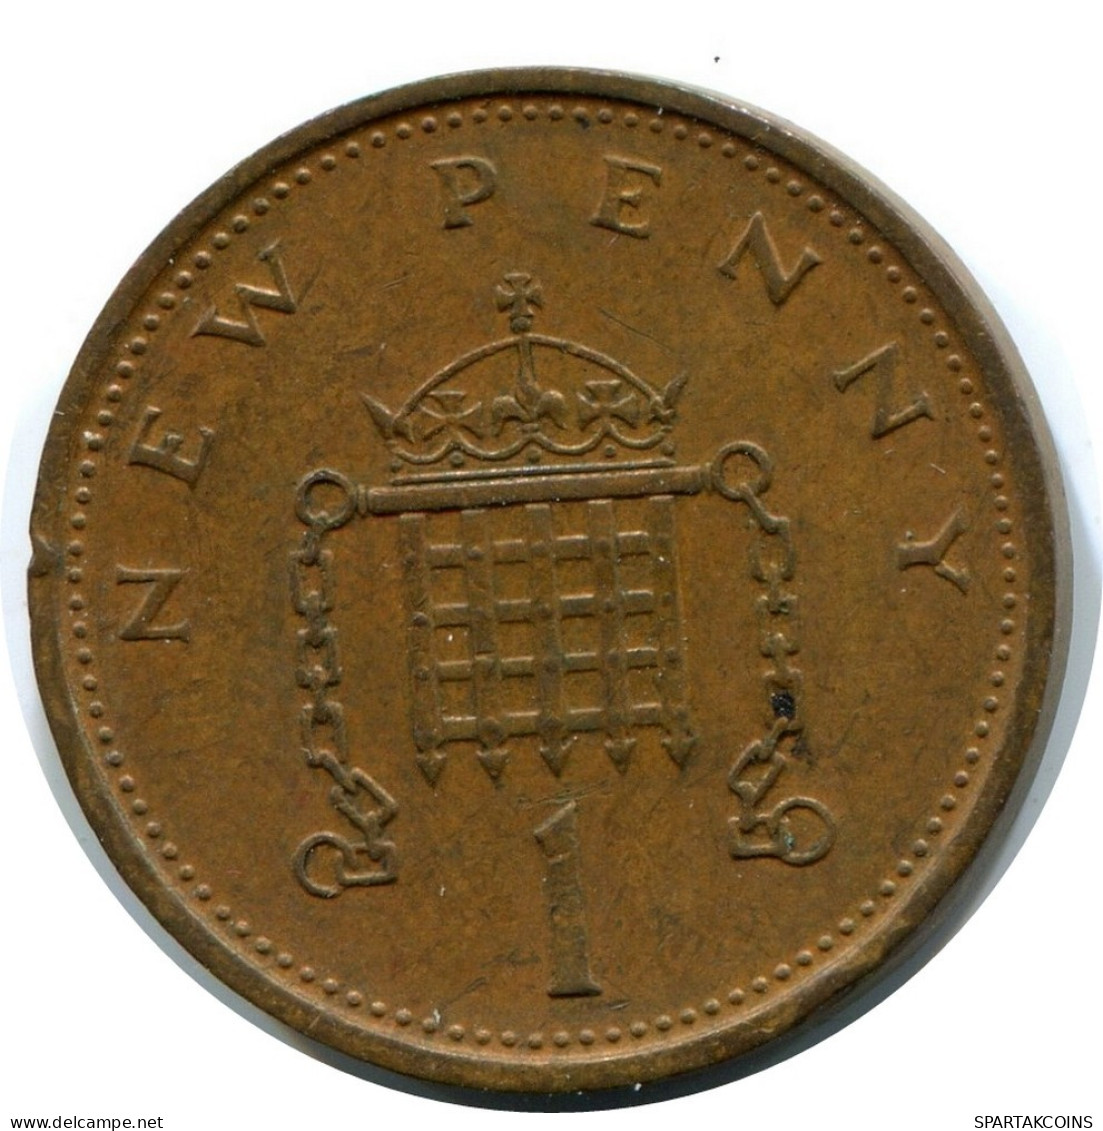 PENNY 1973 UK GREAT BRITAIN Coin #AX084.U.A - 1 Penny & 1 New Penny